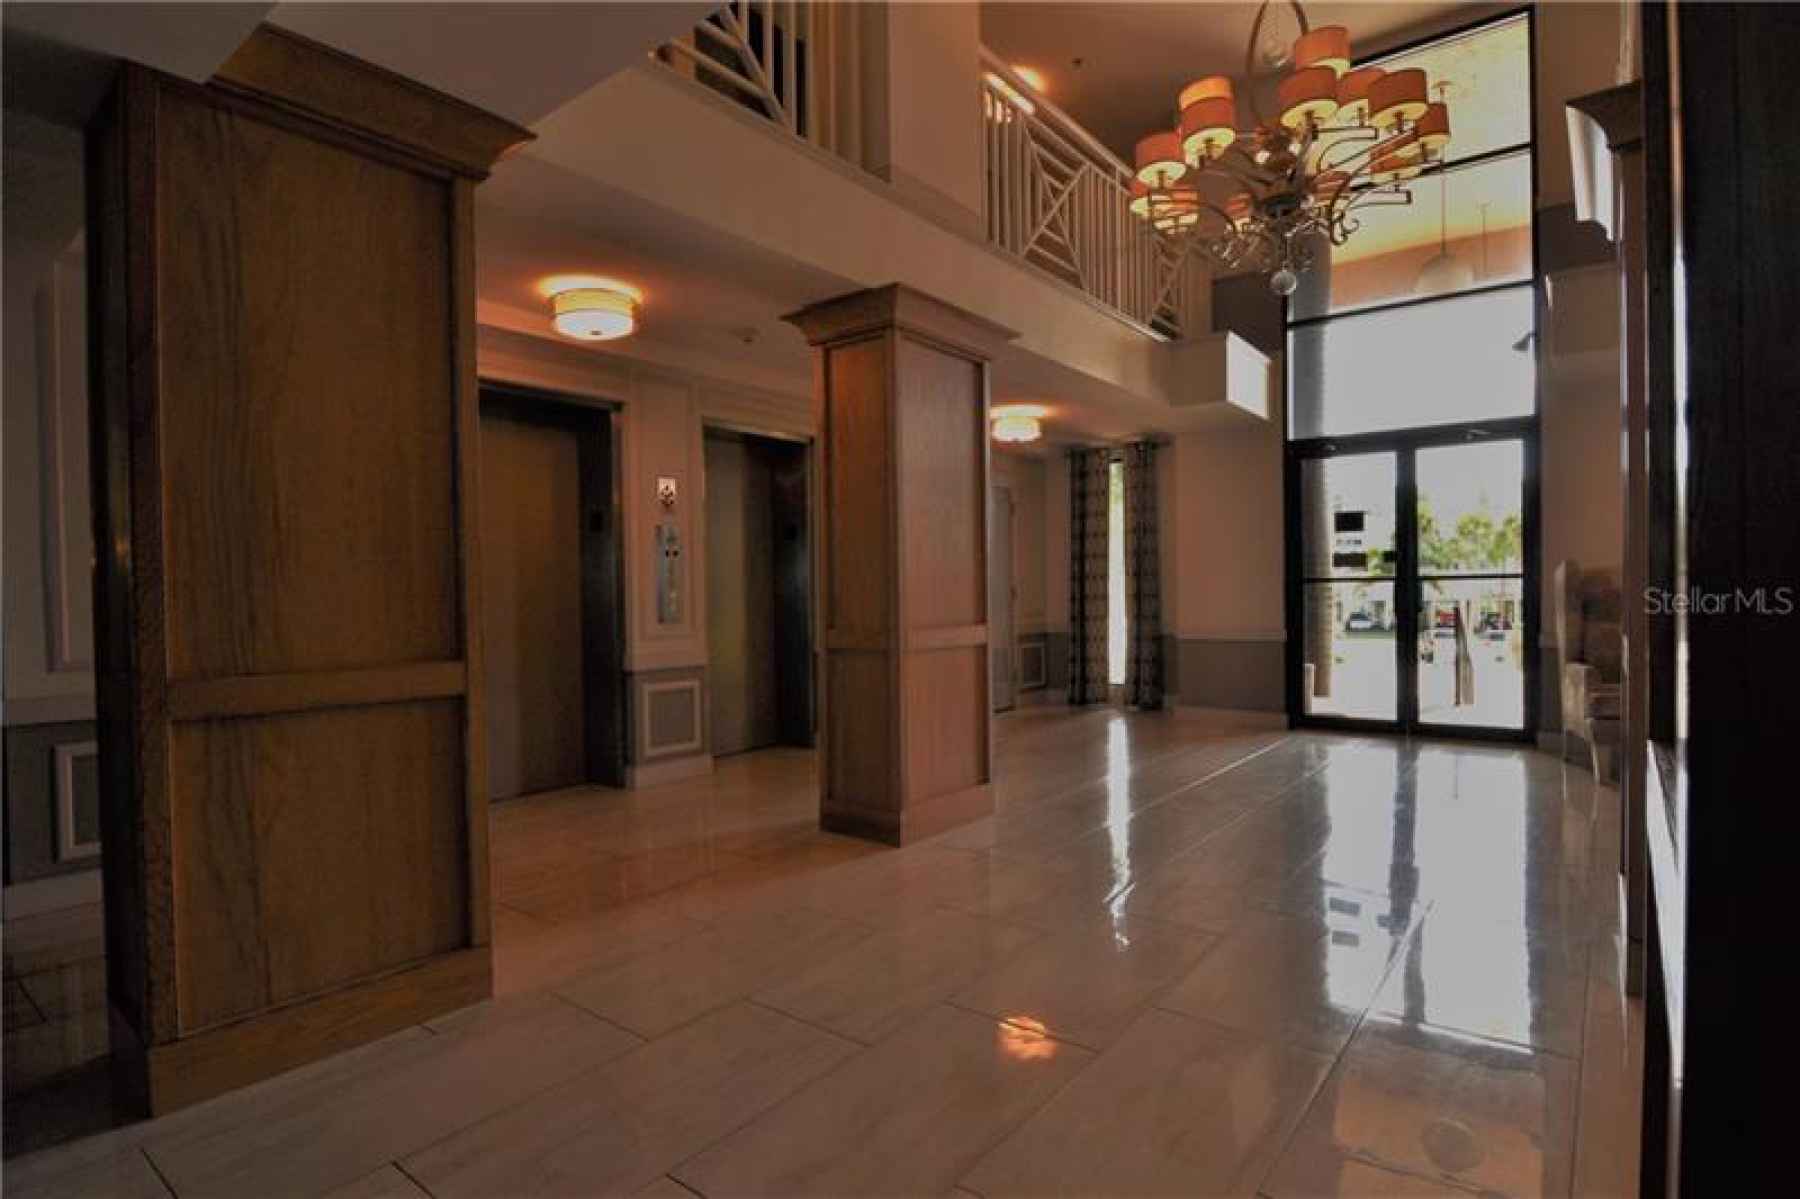 Entryway to elevators and amenities